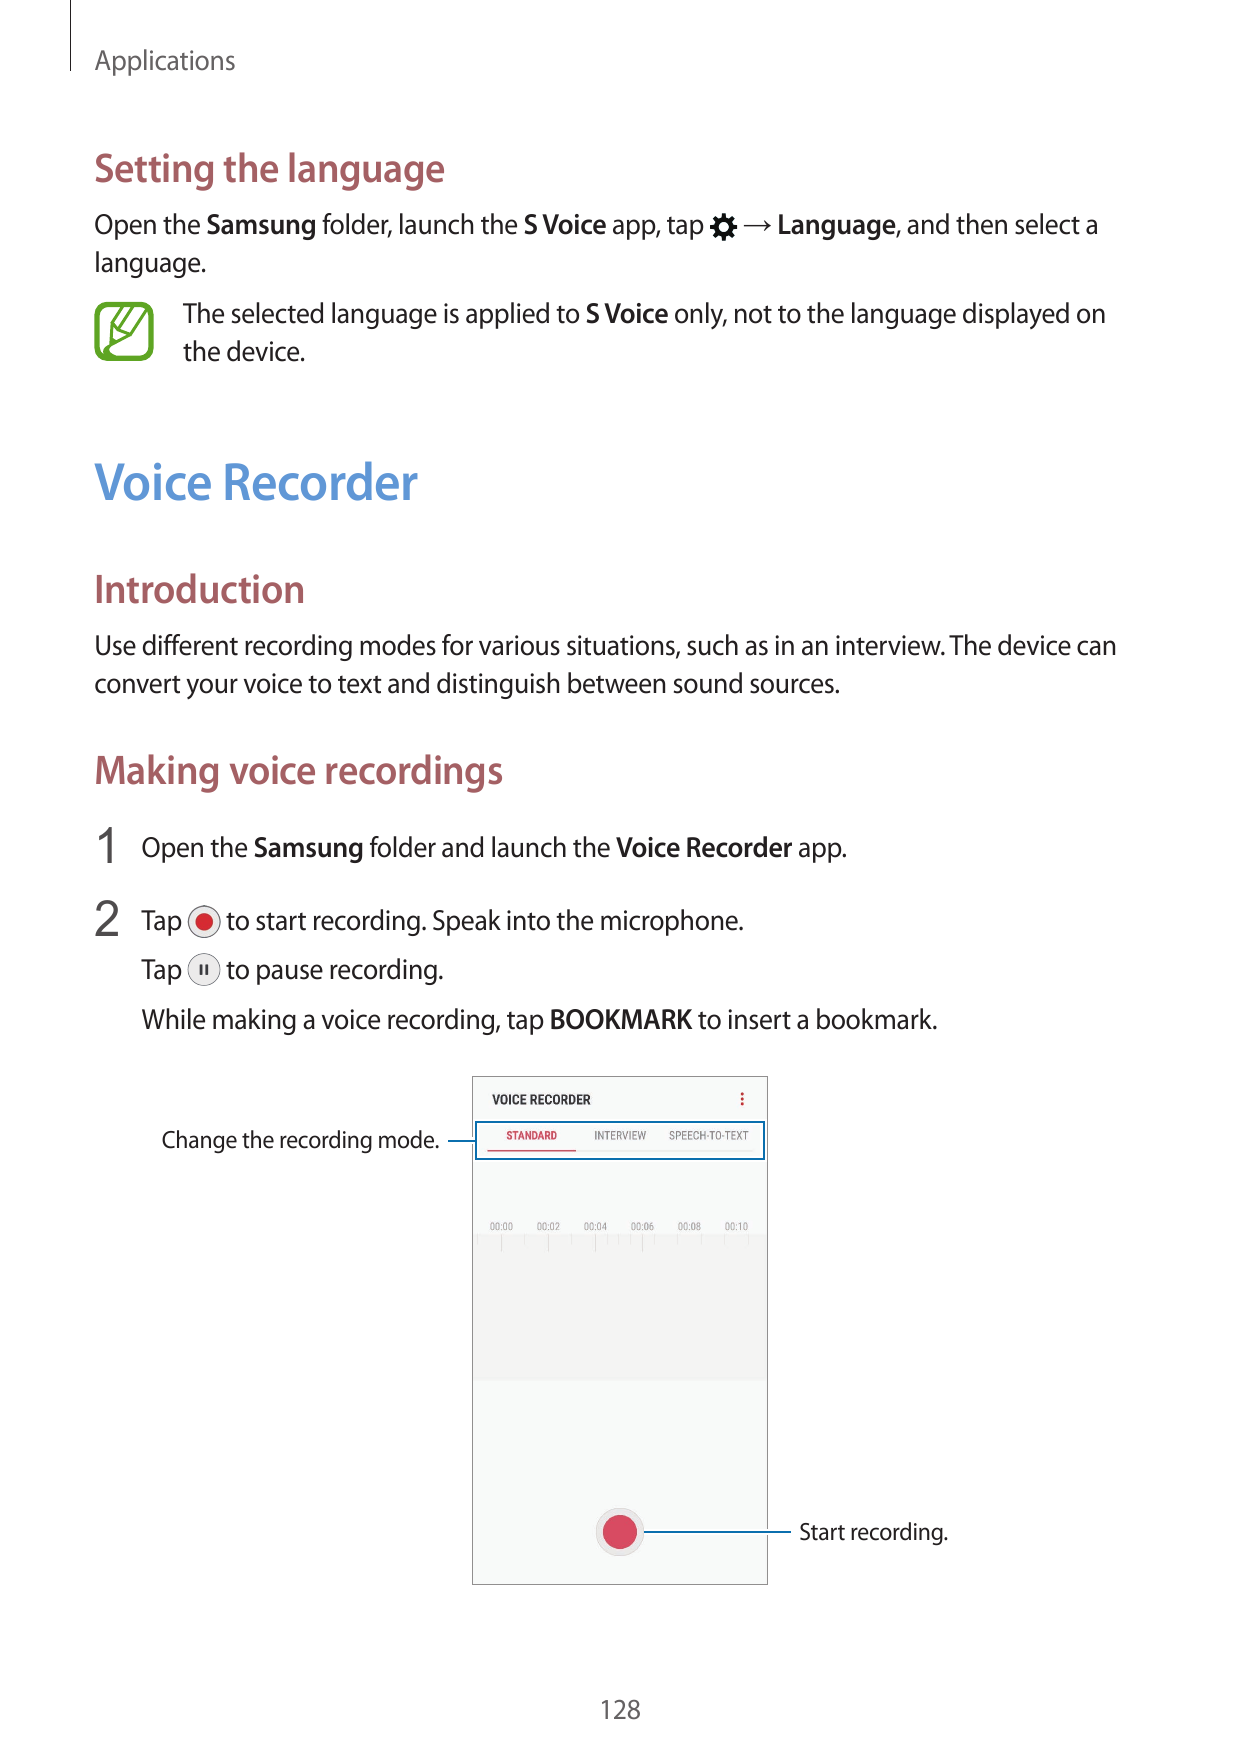 ApplicationsSetting the languageOpen the Samsung folder, launch the S Voice app, taplanguage.→ Language, and then select aThe se